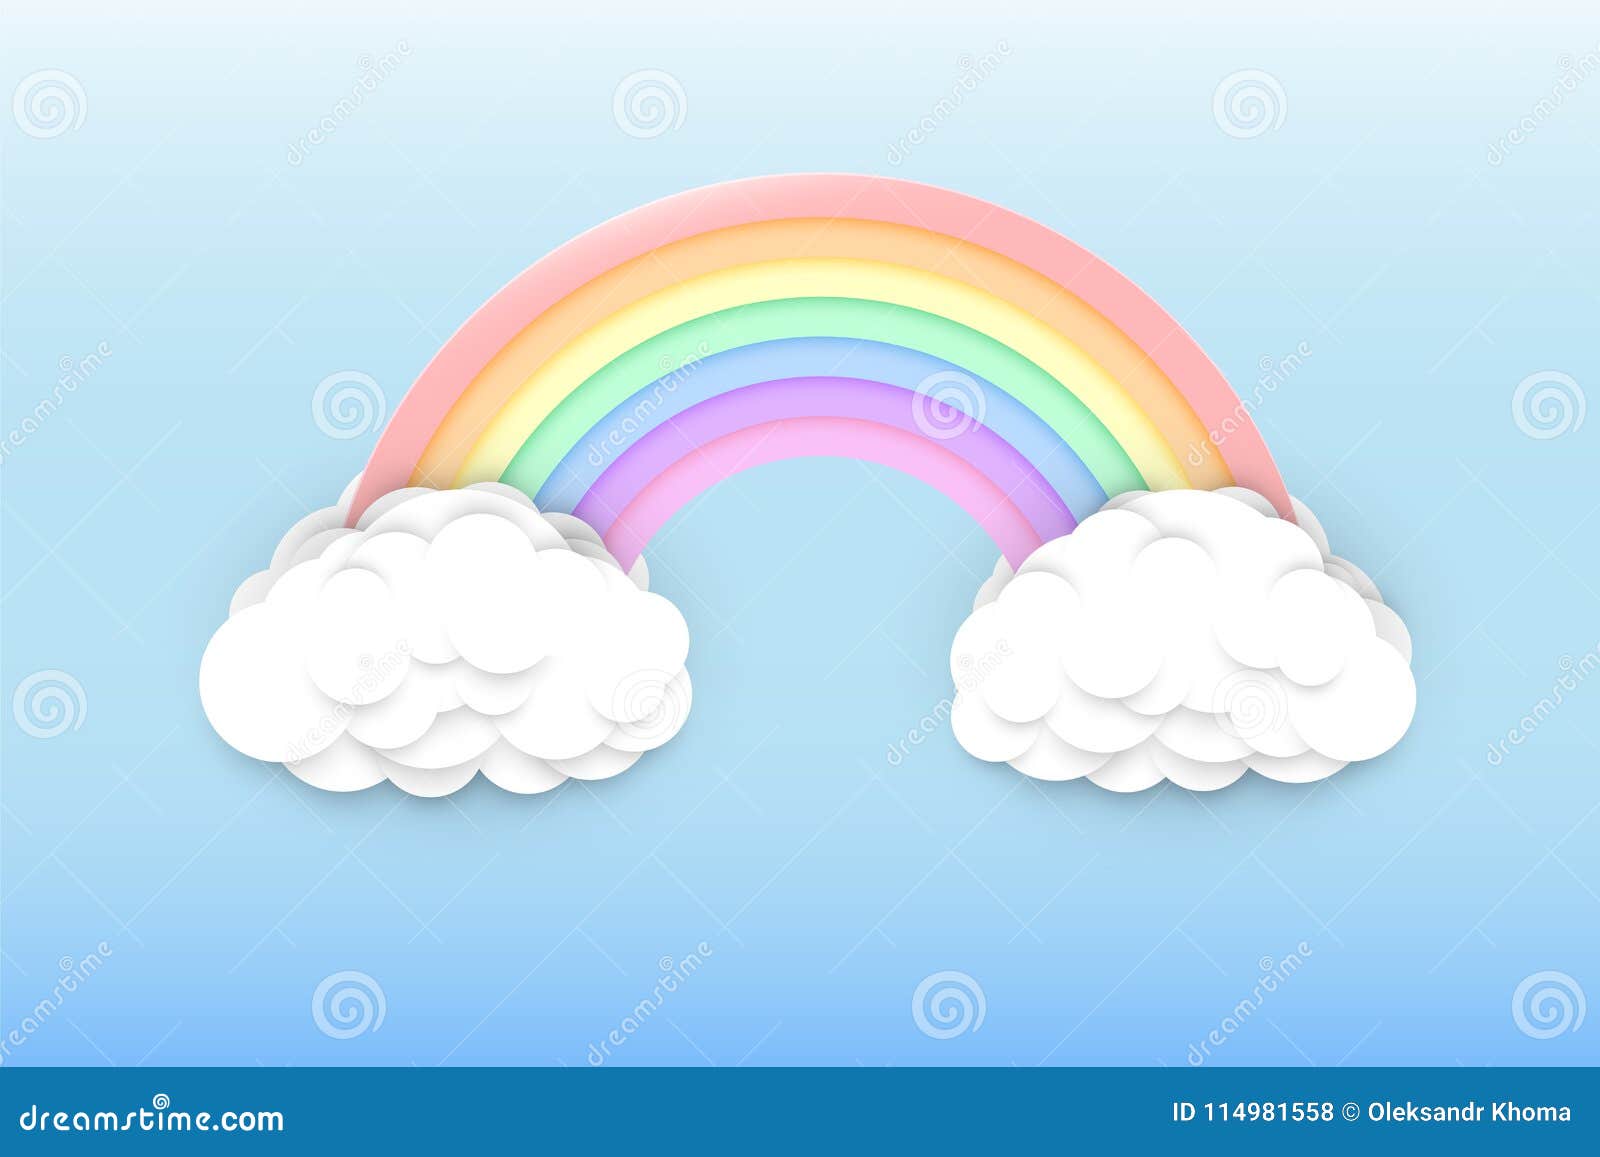 pastel colors rainbow and clouds